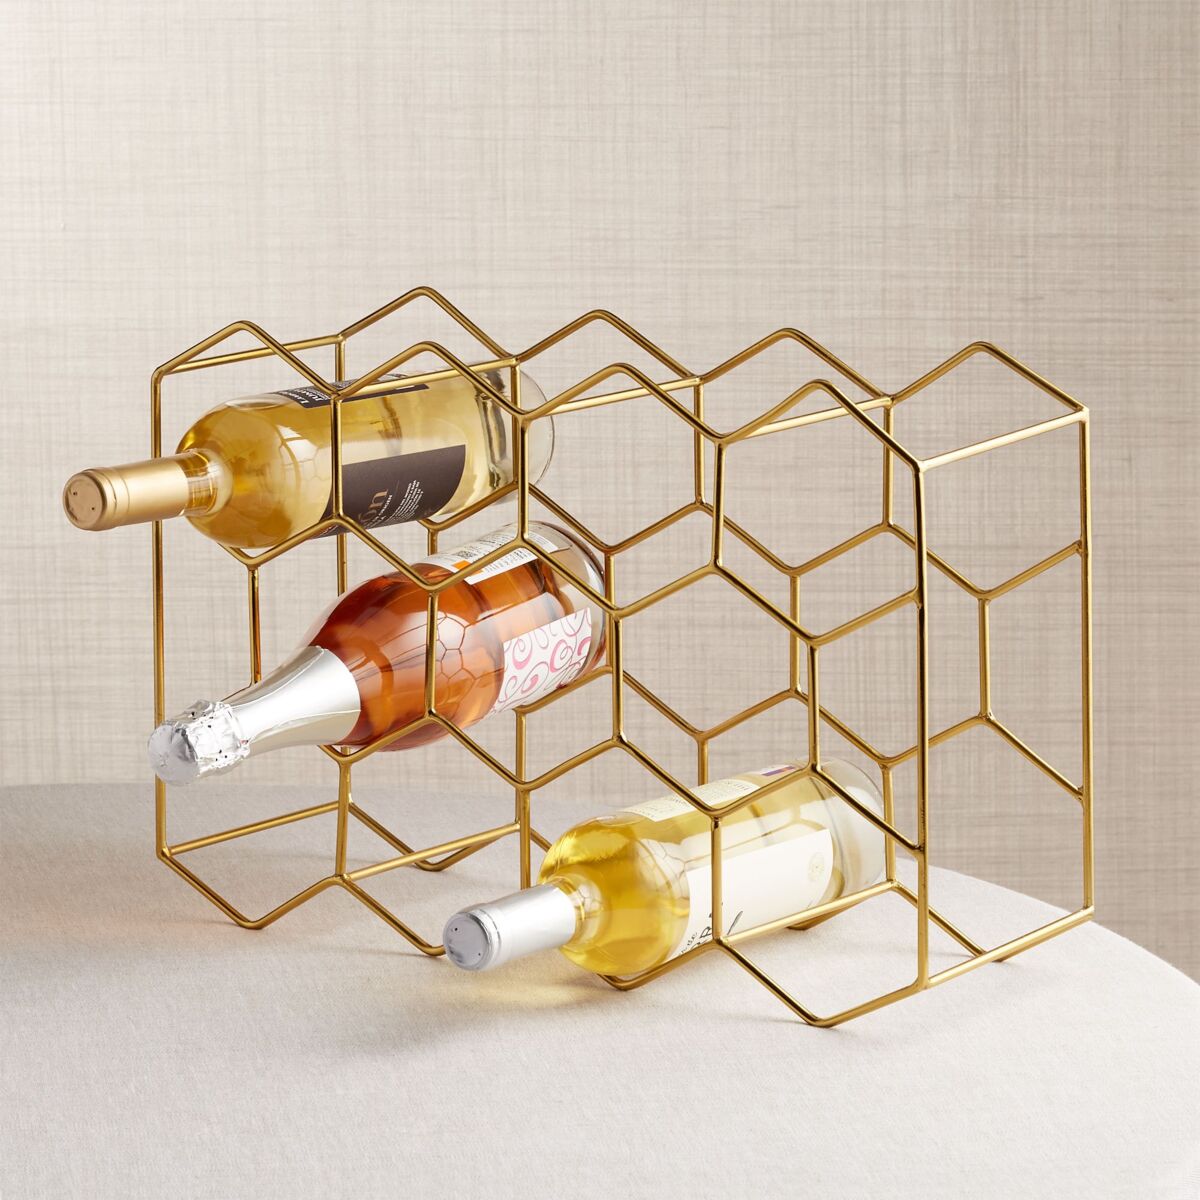 11-bottle gold wine rack at Crate and Barrel